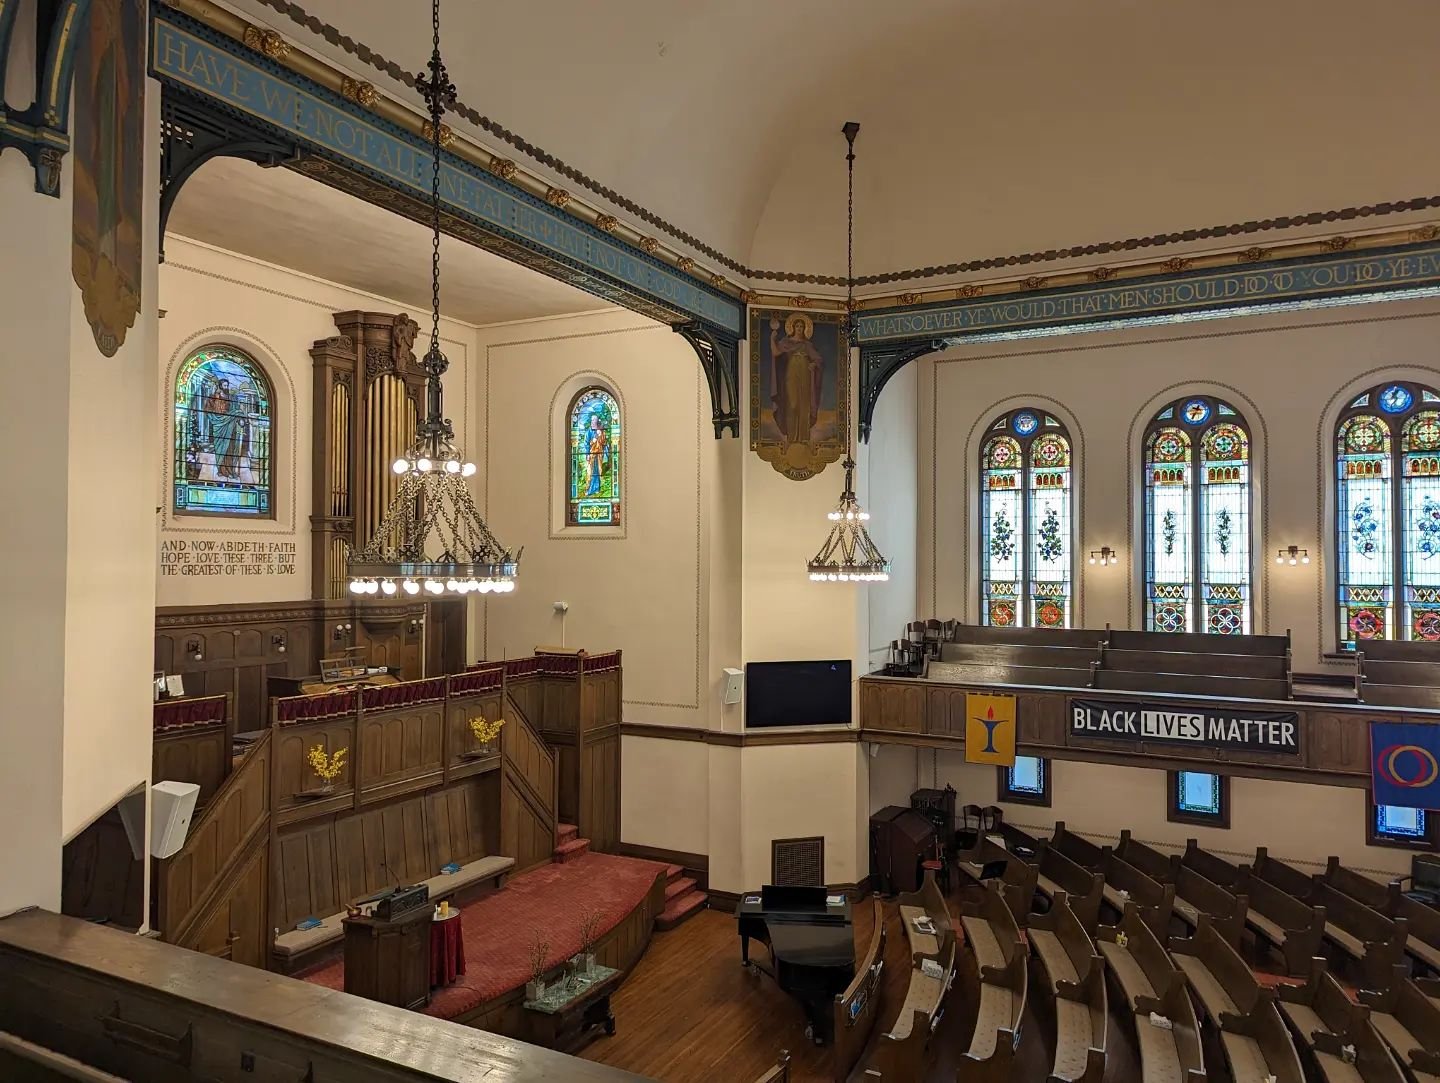 Today we revisited an old friend, Claude Bragdon's peerless First Universalist Church.

We are studying options to reactivate the passive ventilation originally designed into the building and potential mechanical enhancements with our colleagues at L